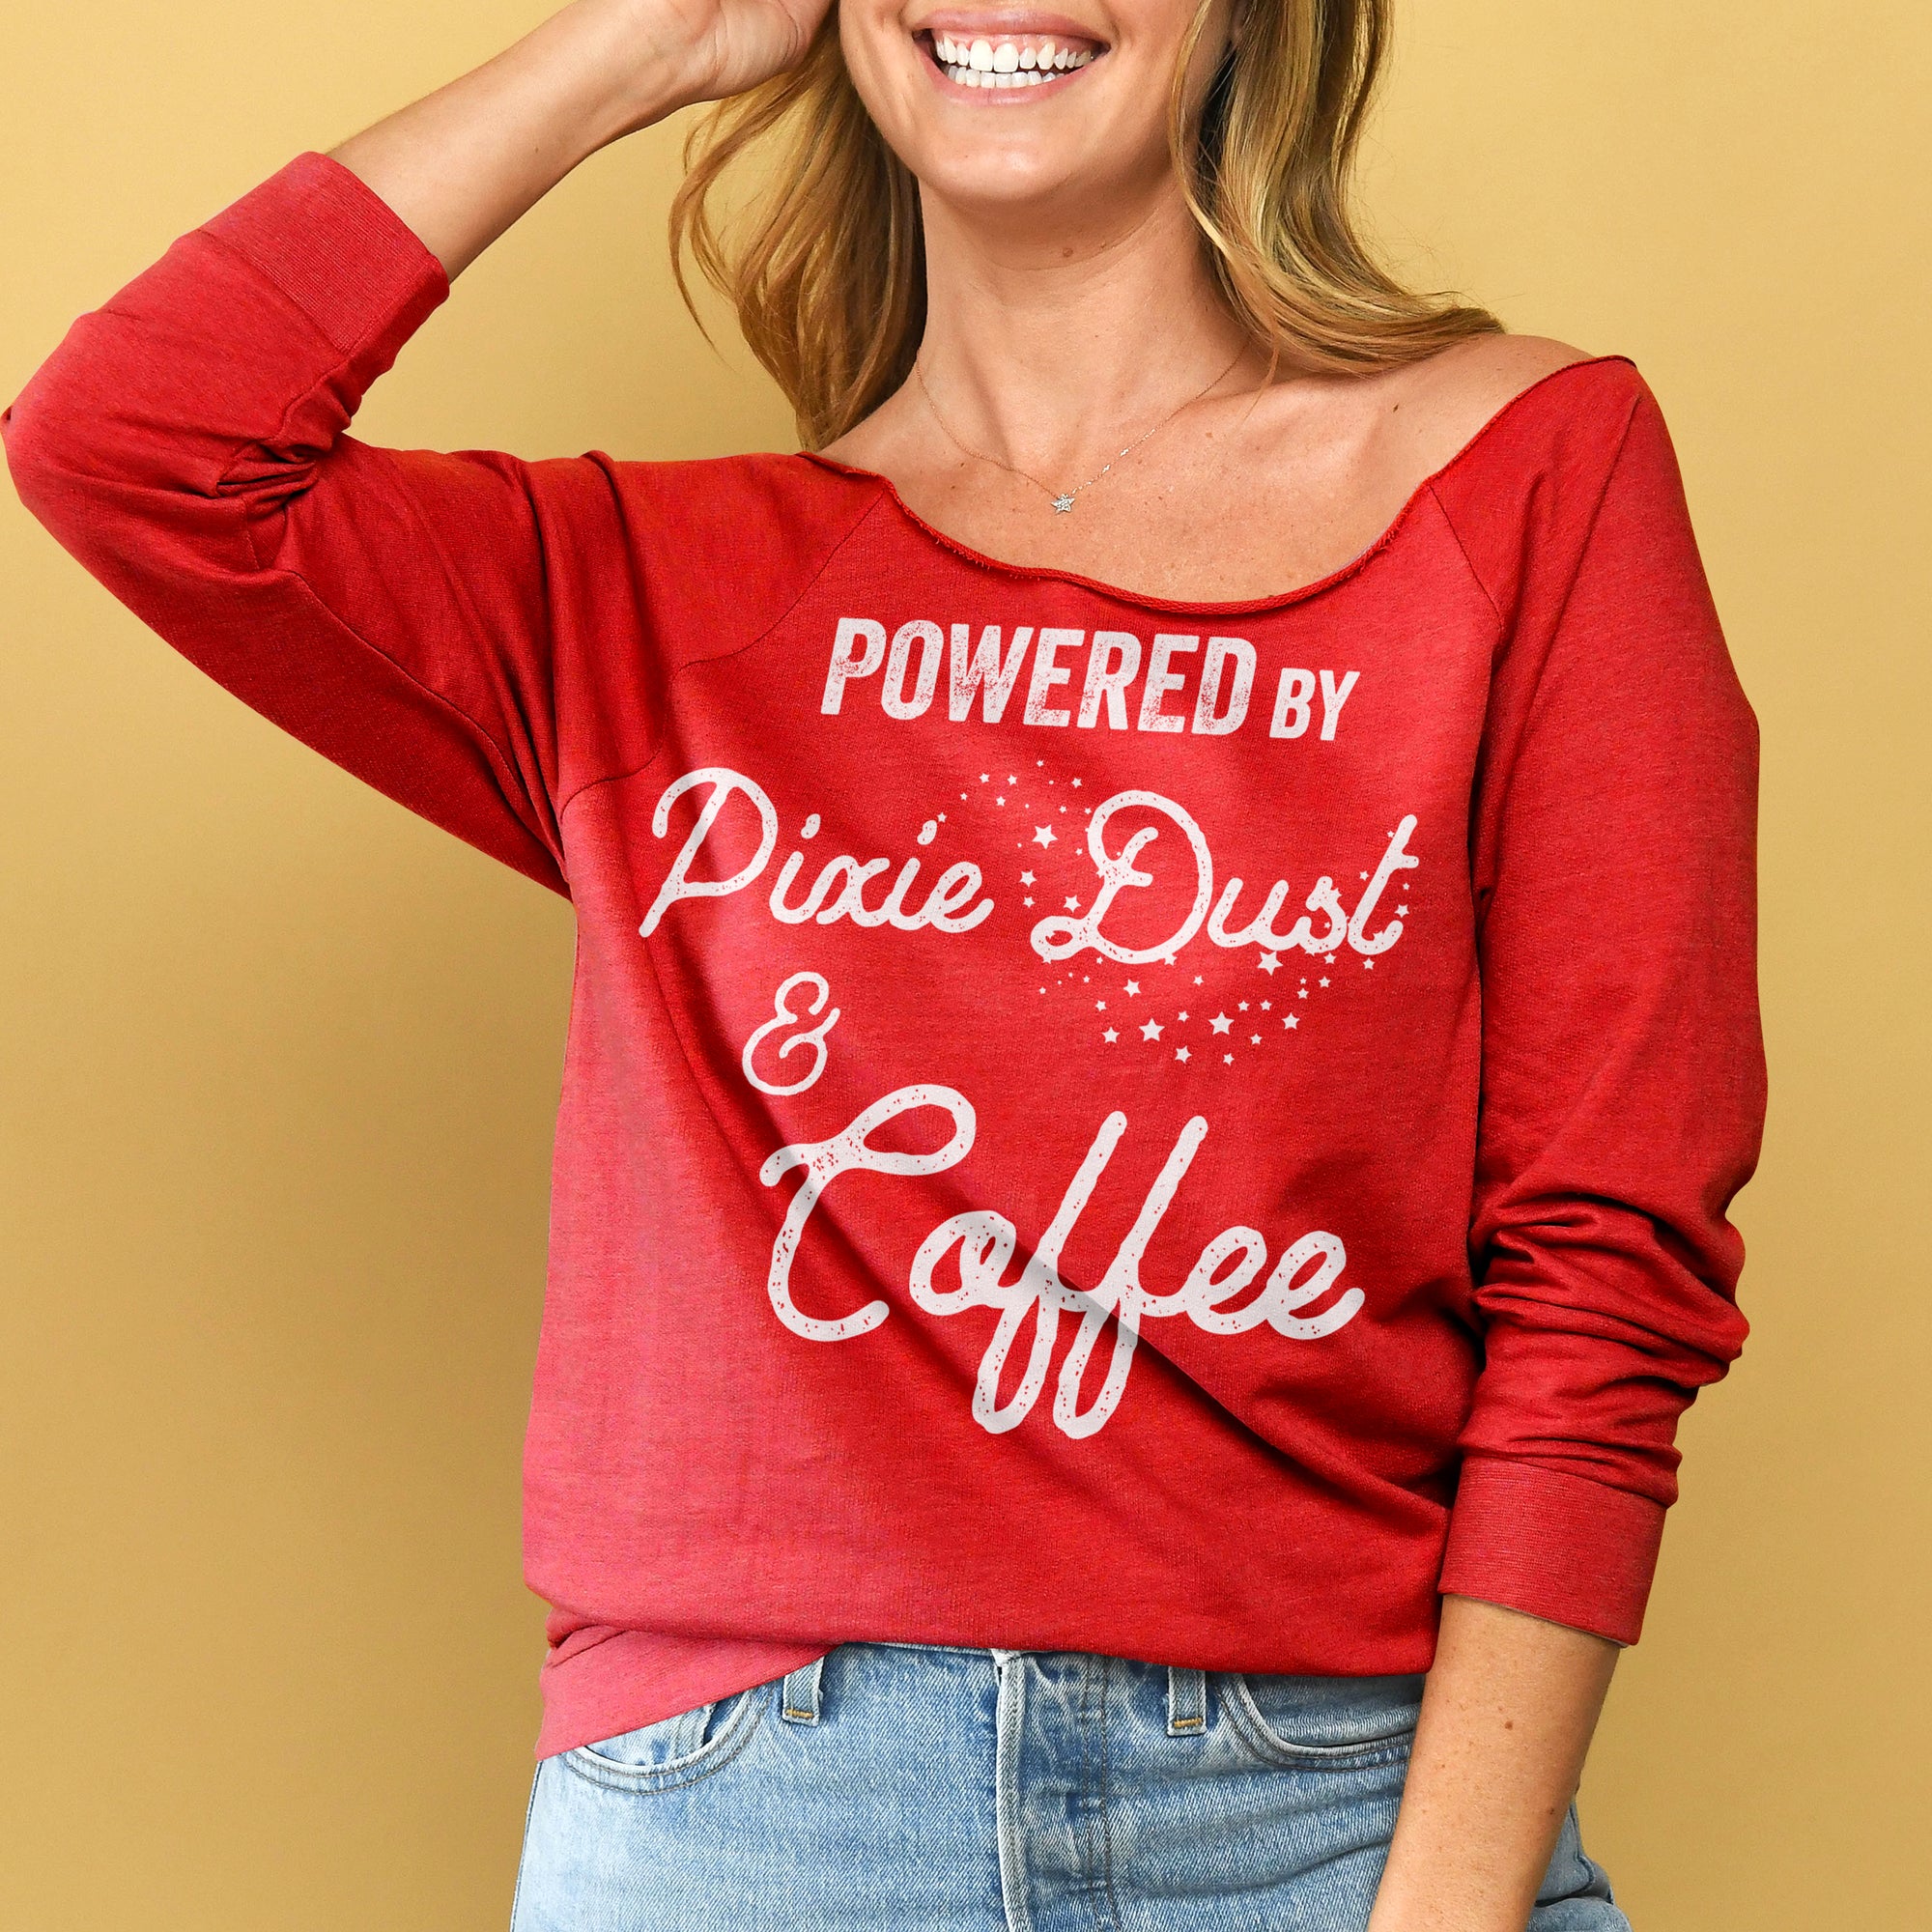 Powered By Pixie Dust And Coffee